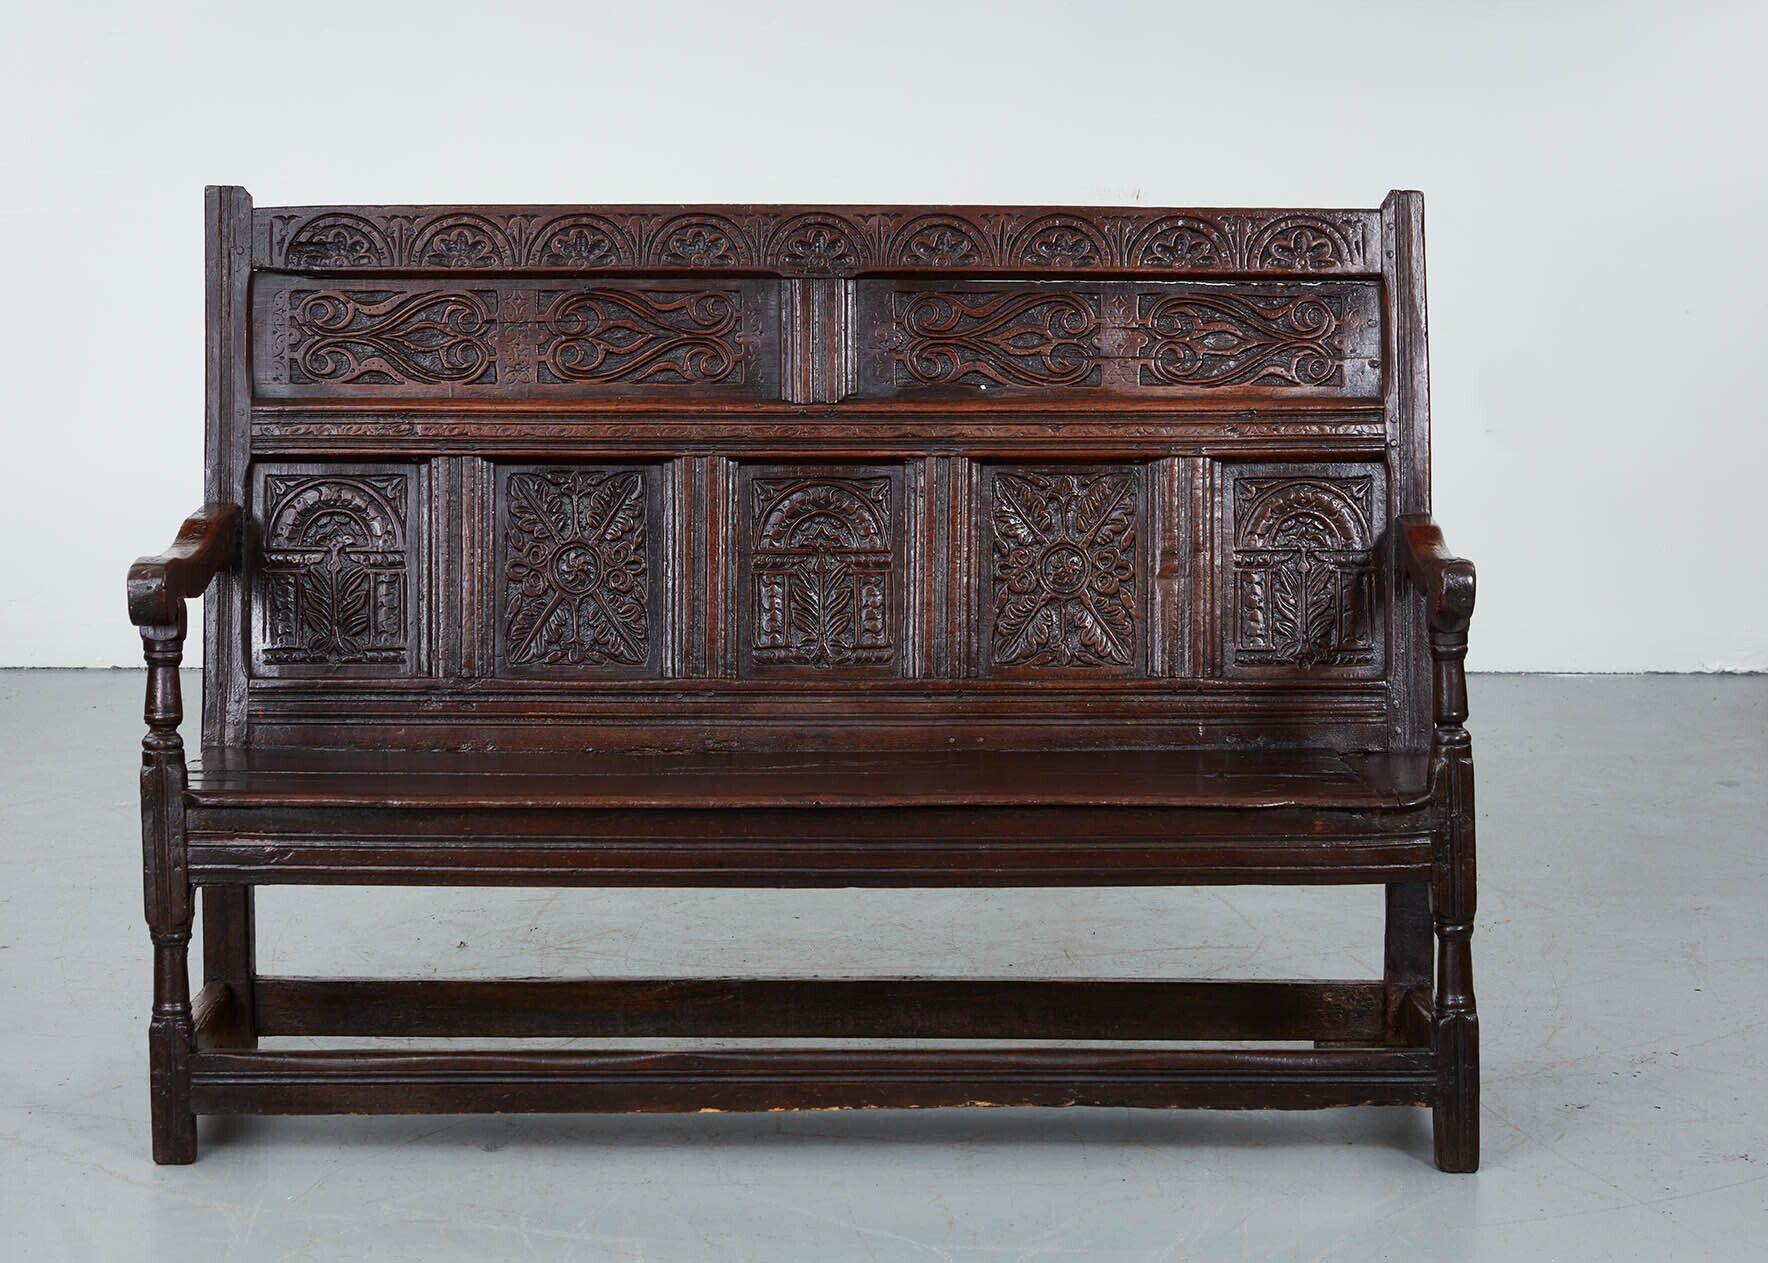 An English 17th century oak bench or settle with tall wainscot back suberbly hand-carved with profuse arched and foliate decoration in two tiers of four over five paneled sections on plank seat with shaped arms and turned arm support and front legs,